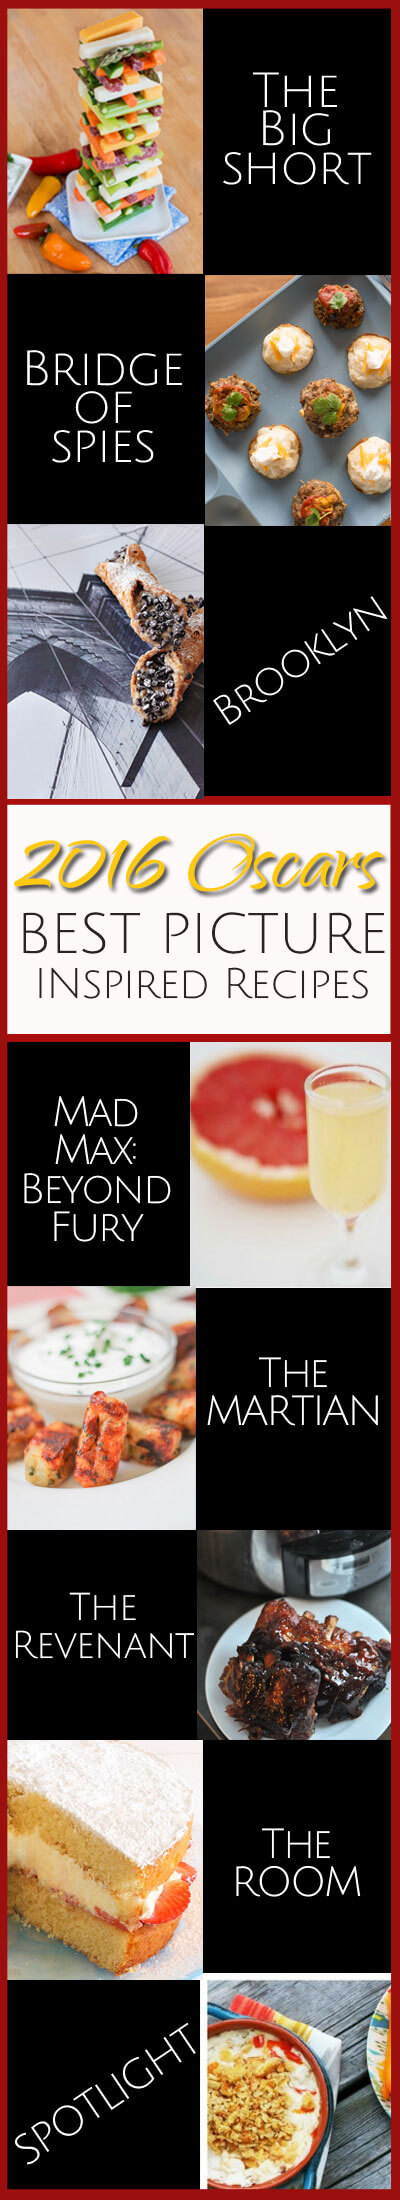 If you're thinking about hosting an Oscars party this year, this collection of best picture-inspired recipes -- along with tips and tricks from food bloggers -- should help you host an award-winning evening for your friends and family.